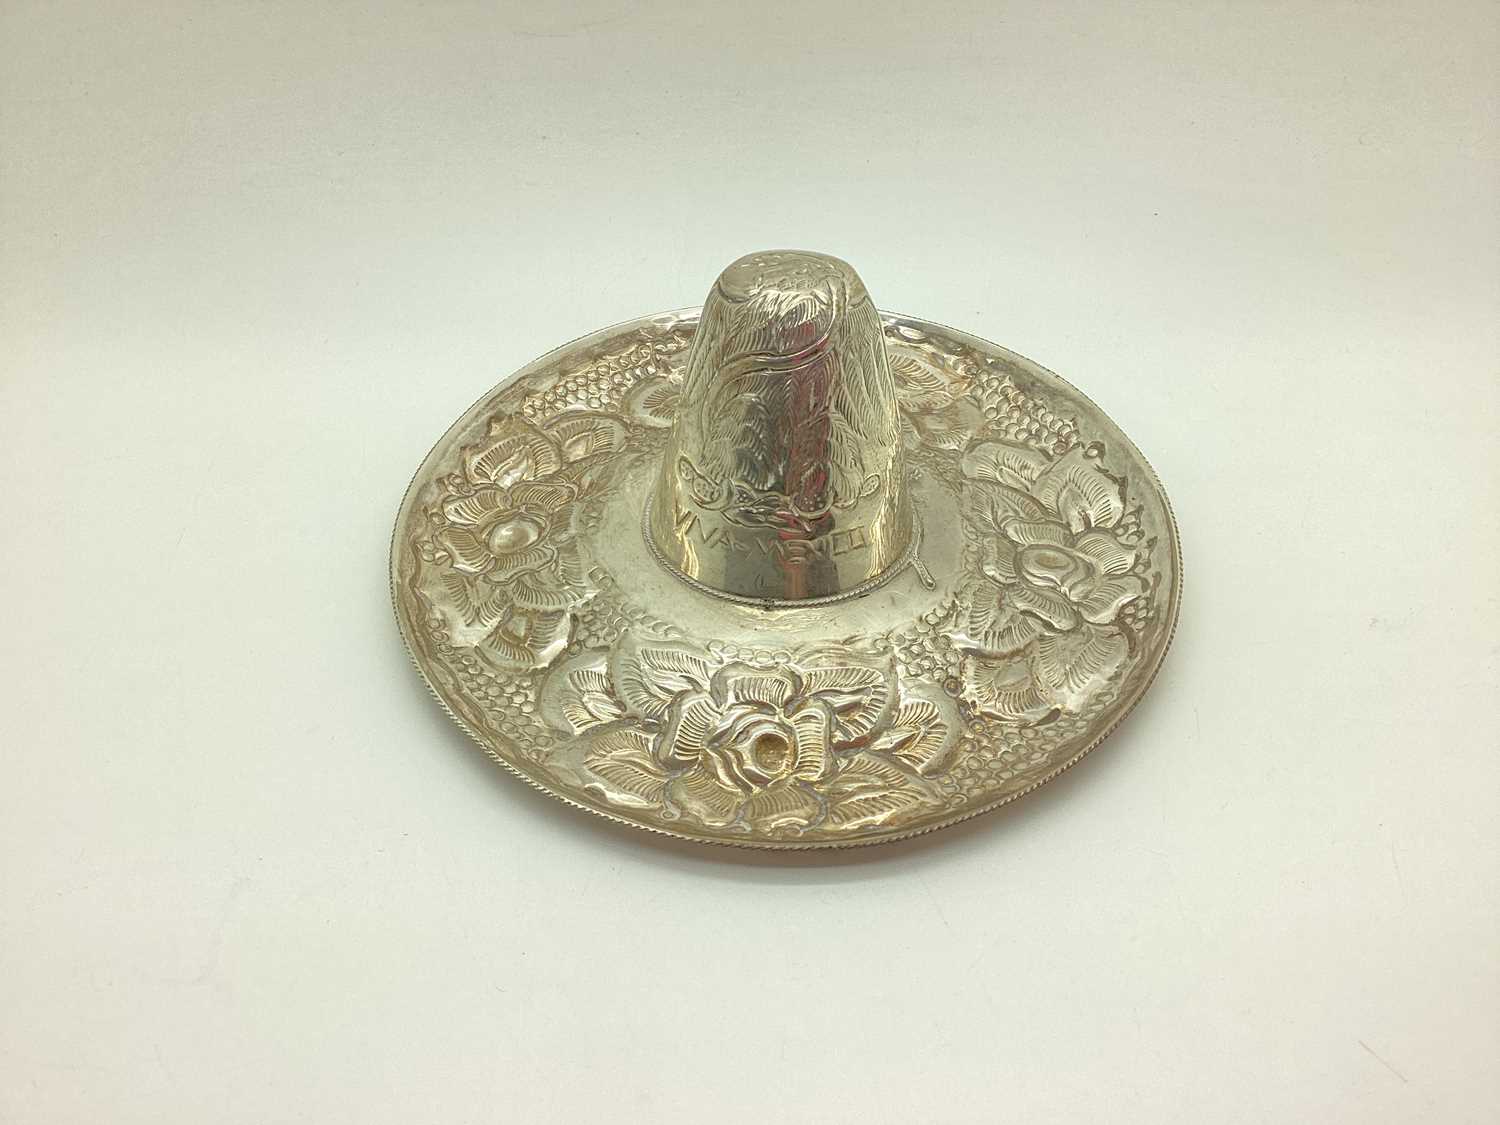 Lot 96 - A Mexican Sombrero Souvenir, stamped "Sterling...